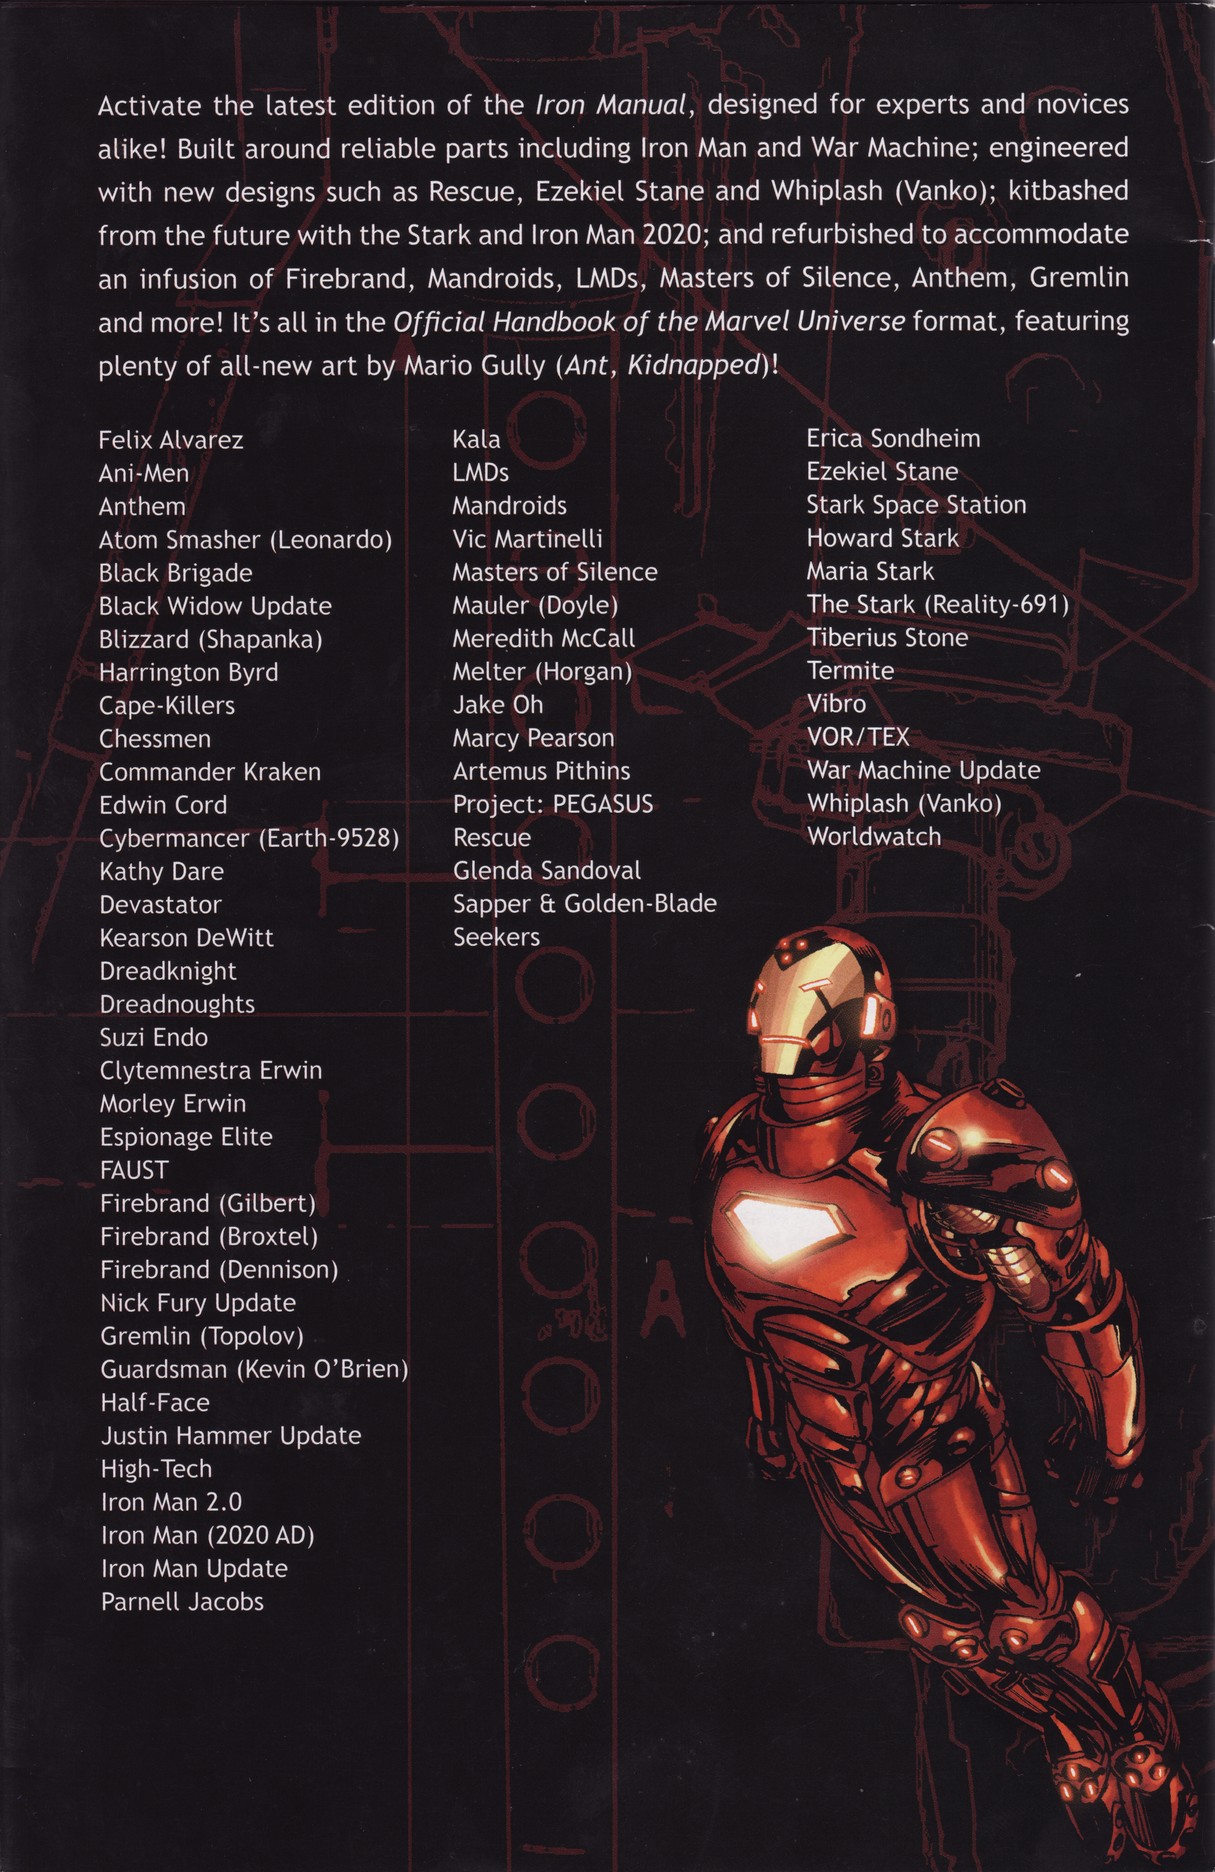 Read online Iron Manual Mark 3 comic -  Issue # Full - 68